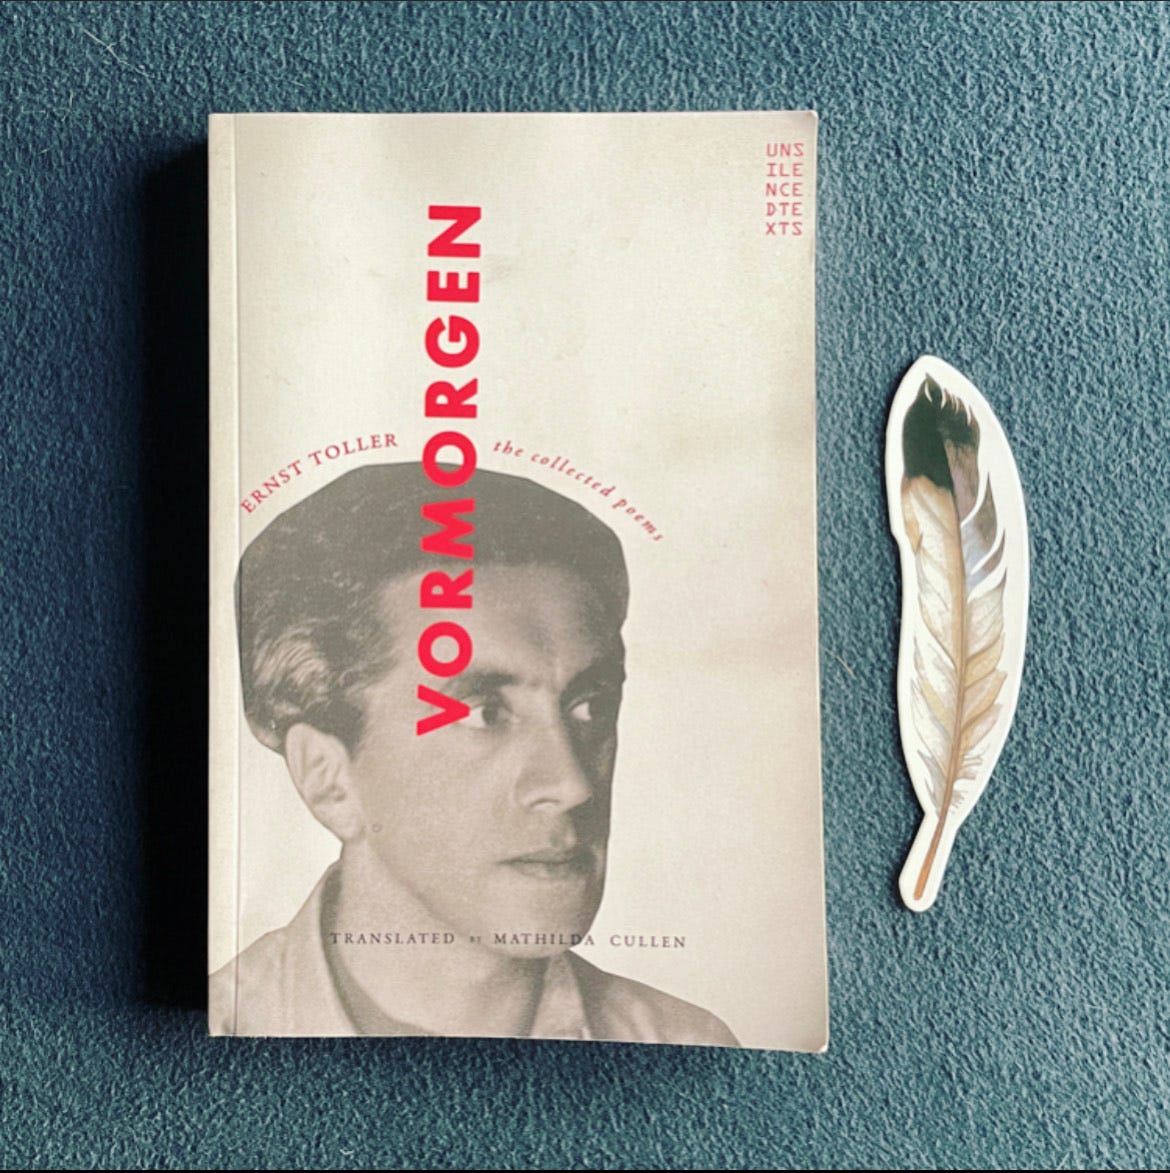 A photograph of the cover of VORMORGEN, which features a photograph of Ernst Toller. A paper feather lays beside it on a solid background.